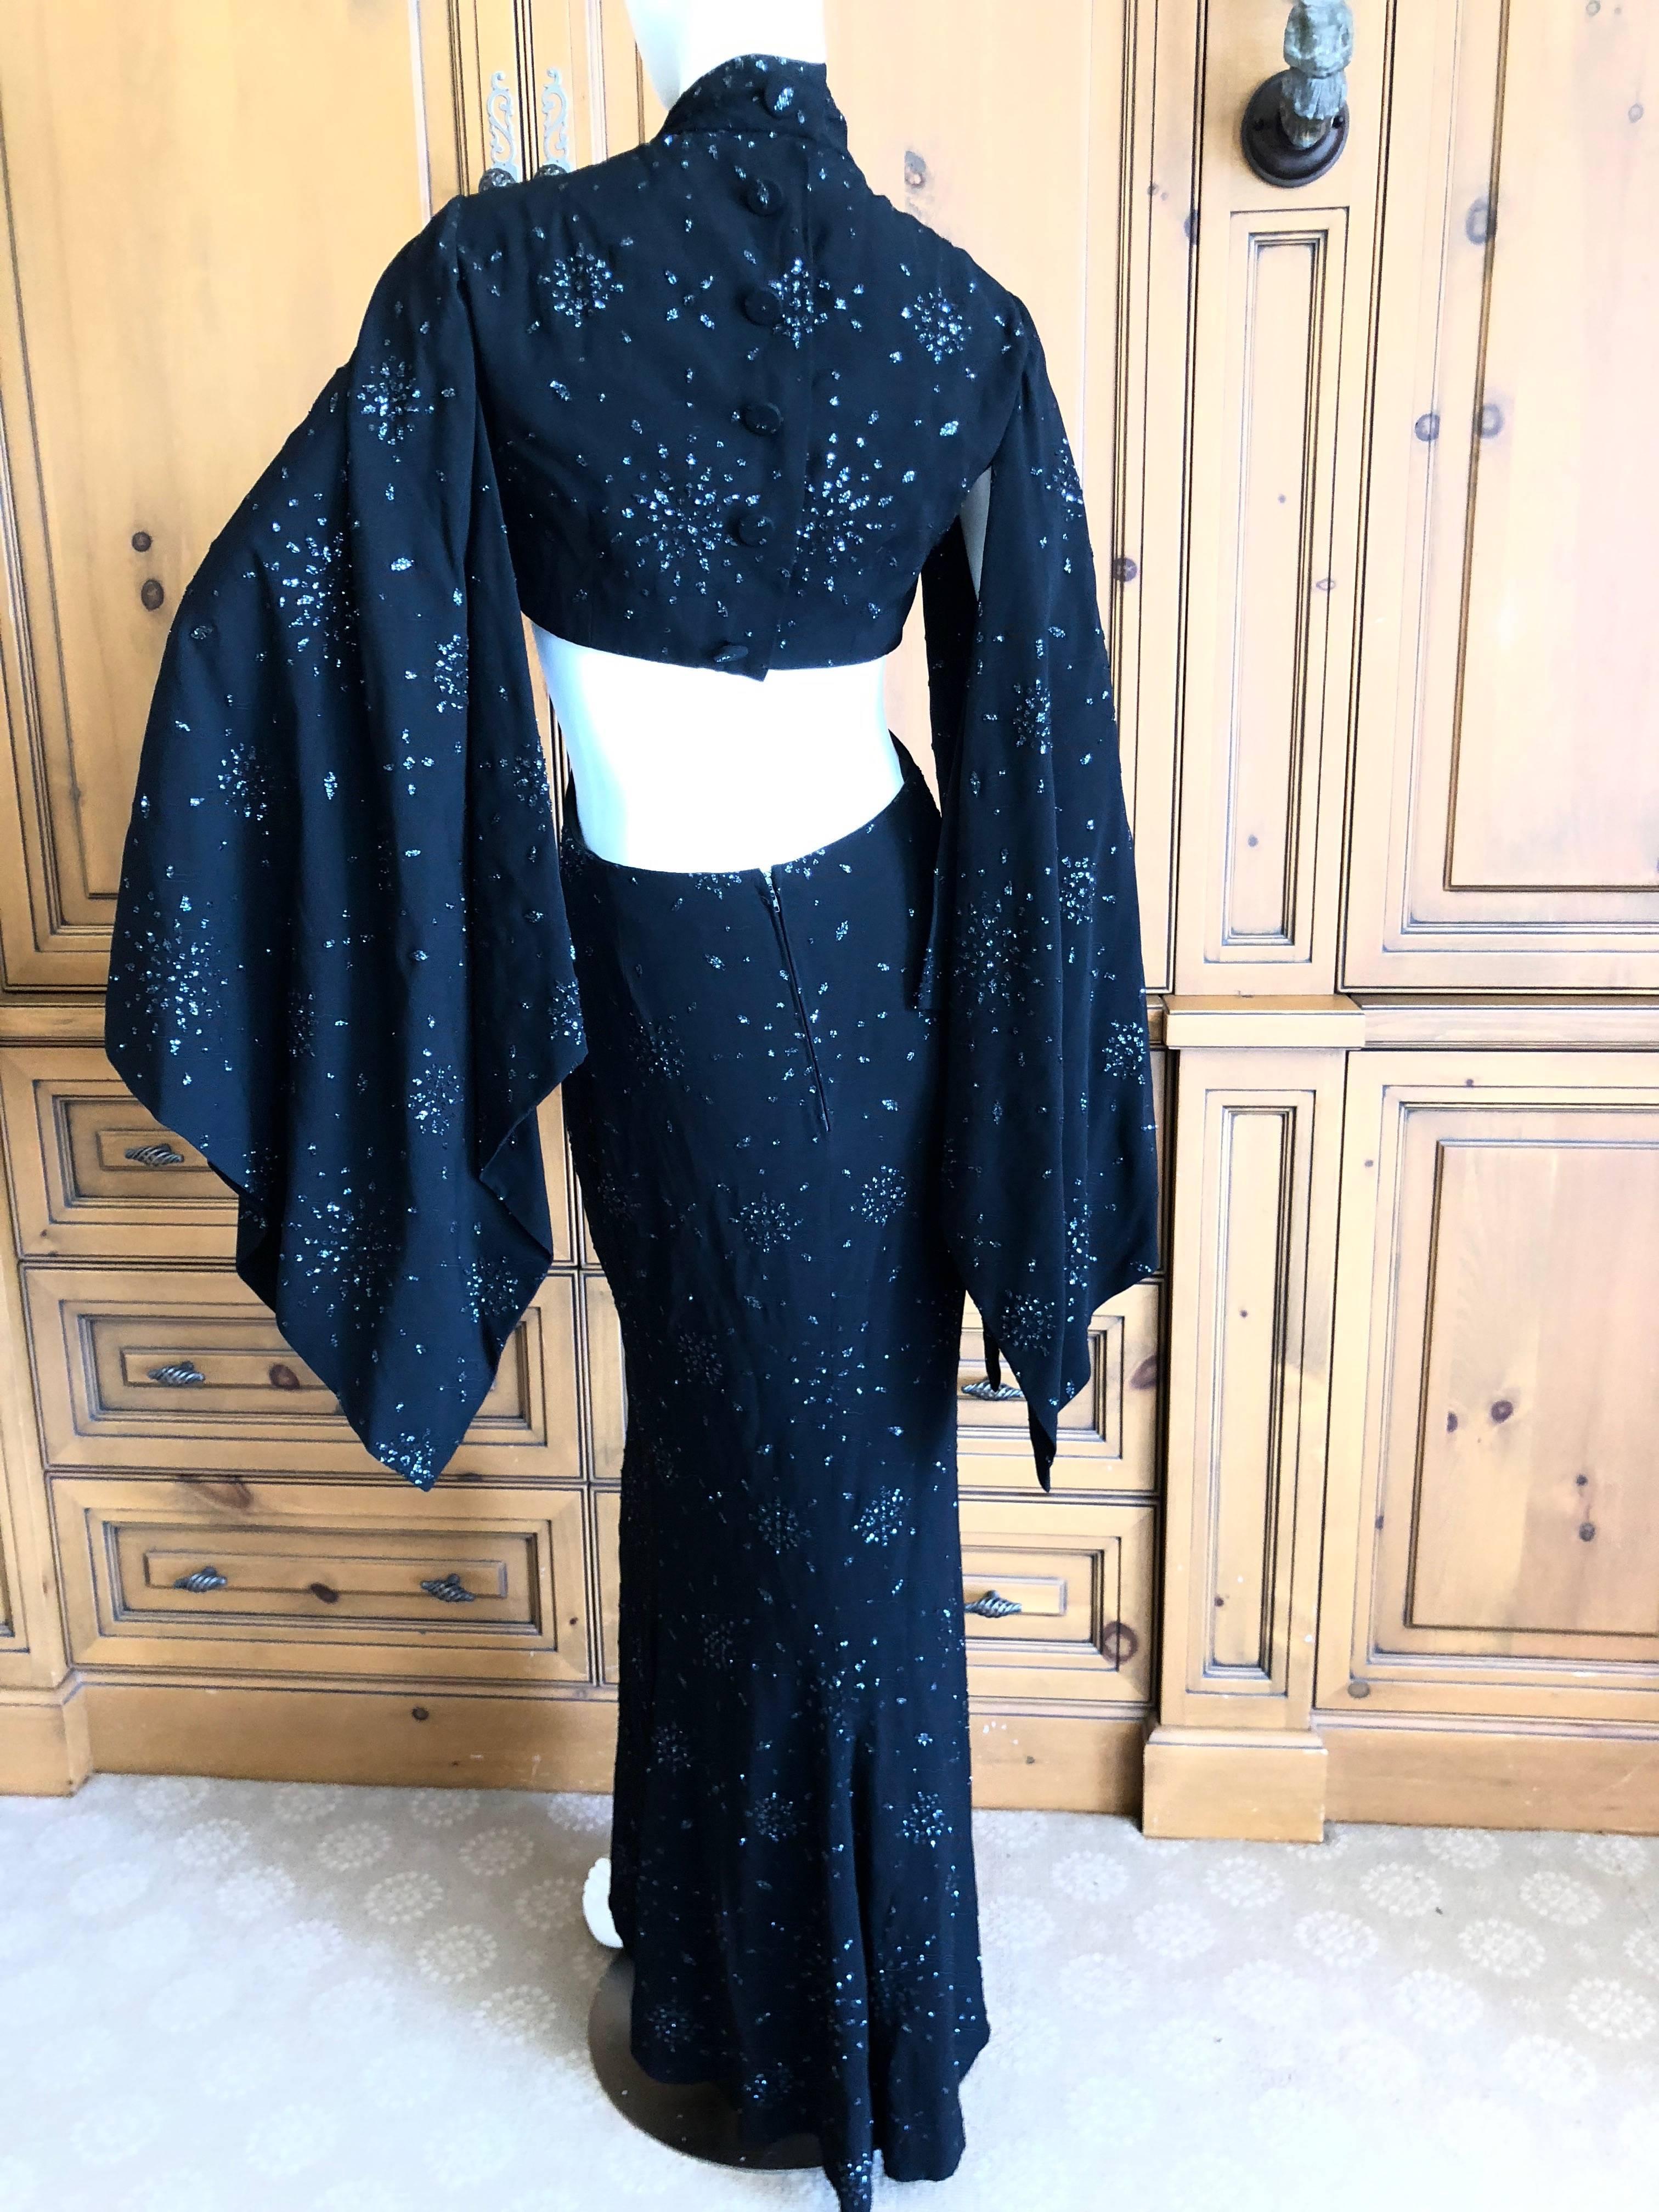 Cardinali 1970's Seductive Glittering Cut Out Evening Dress with Kimono Sleeves For Sale 7